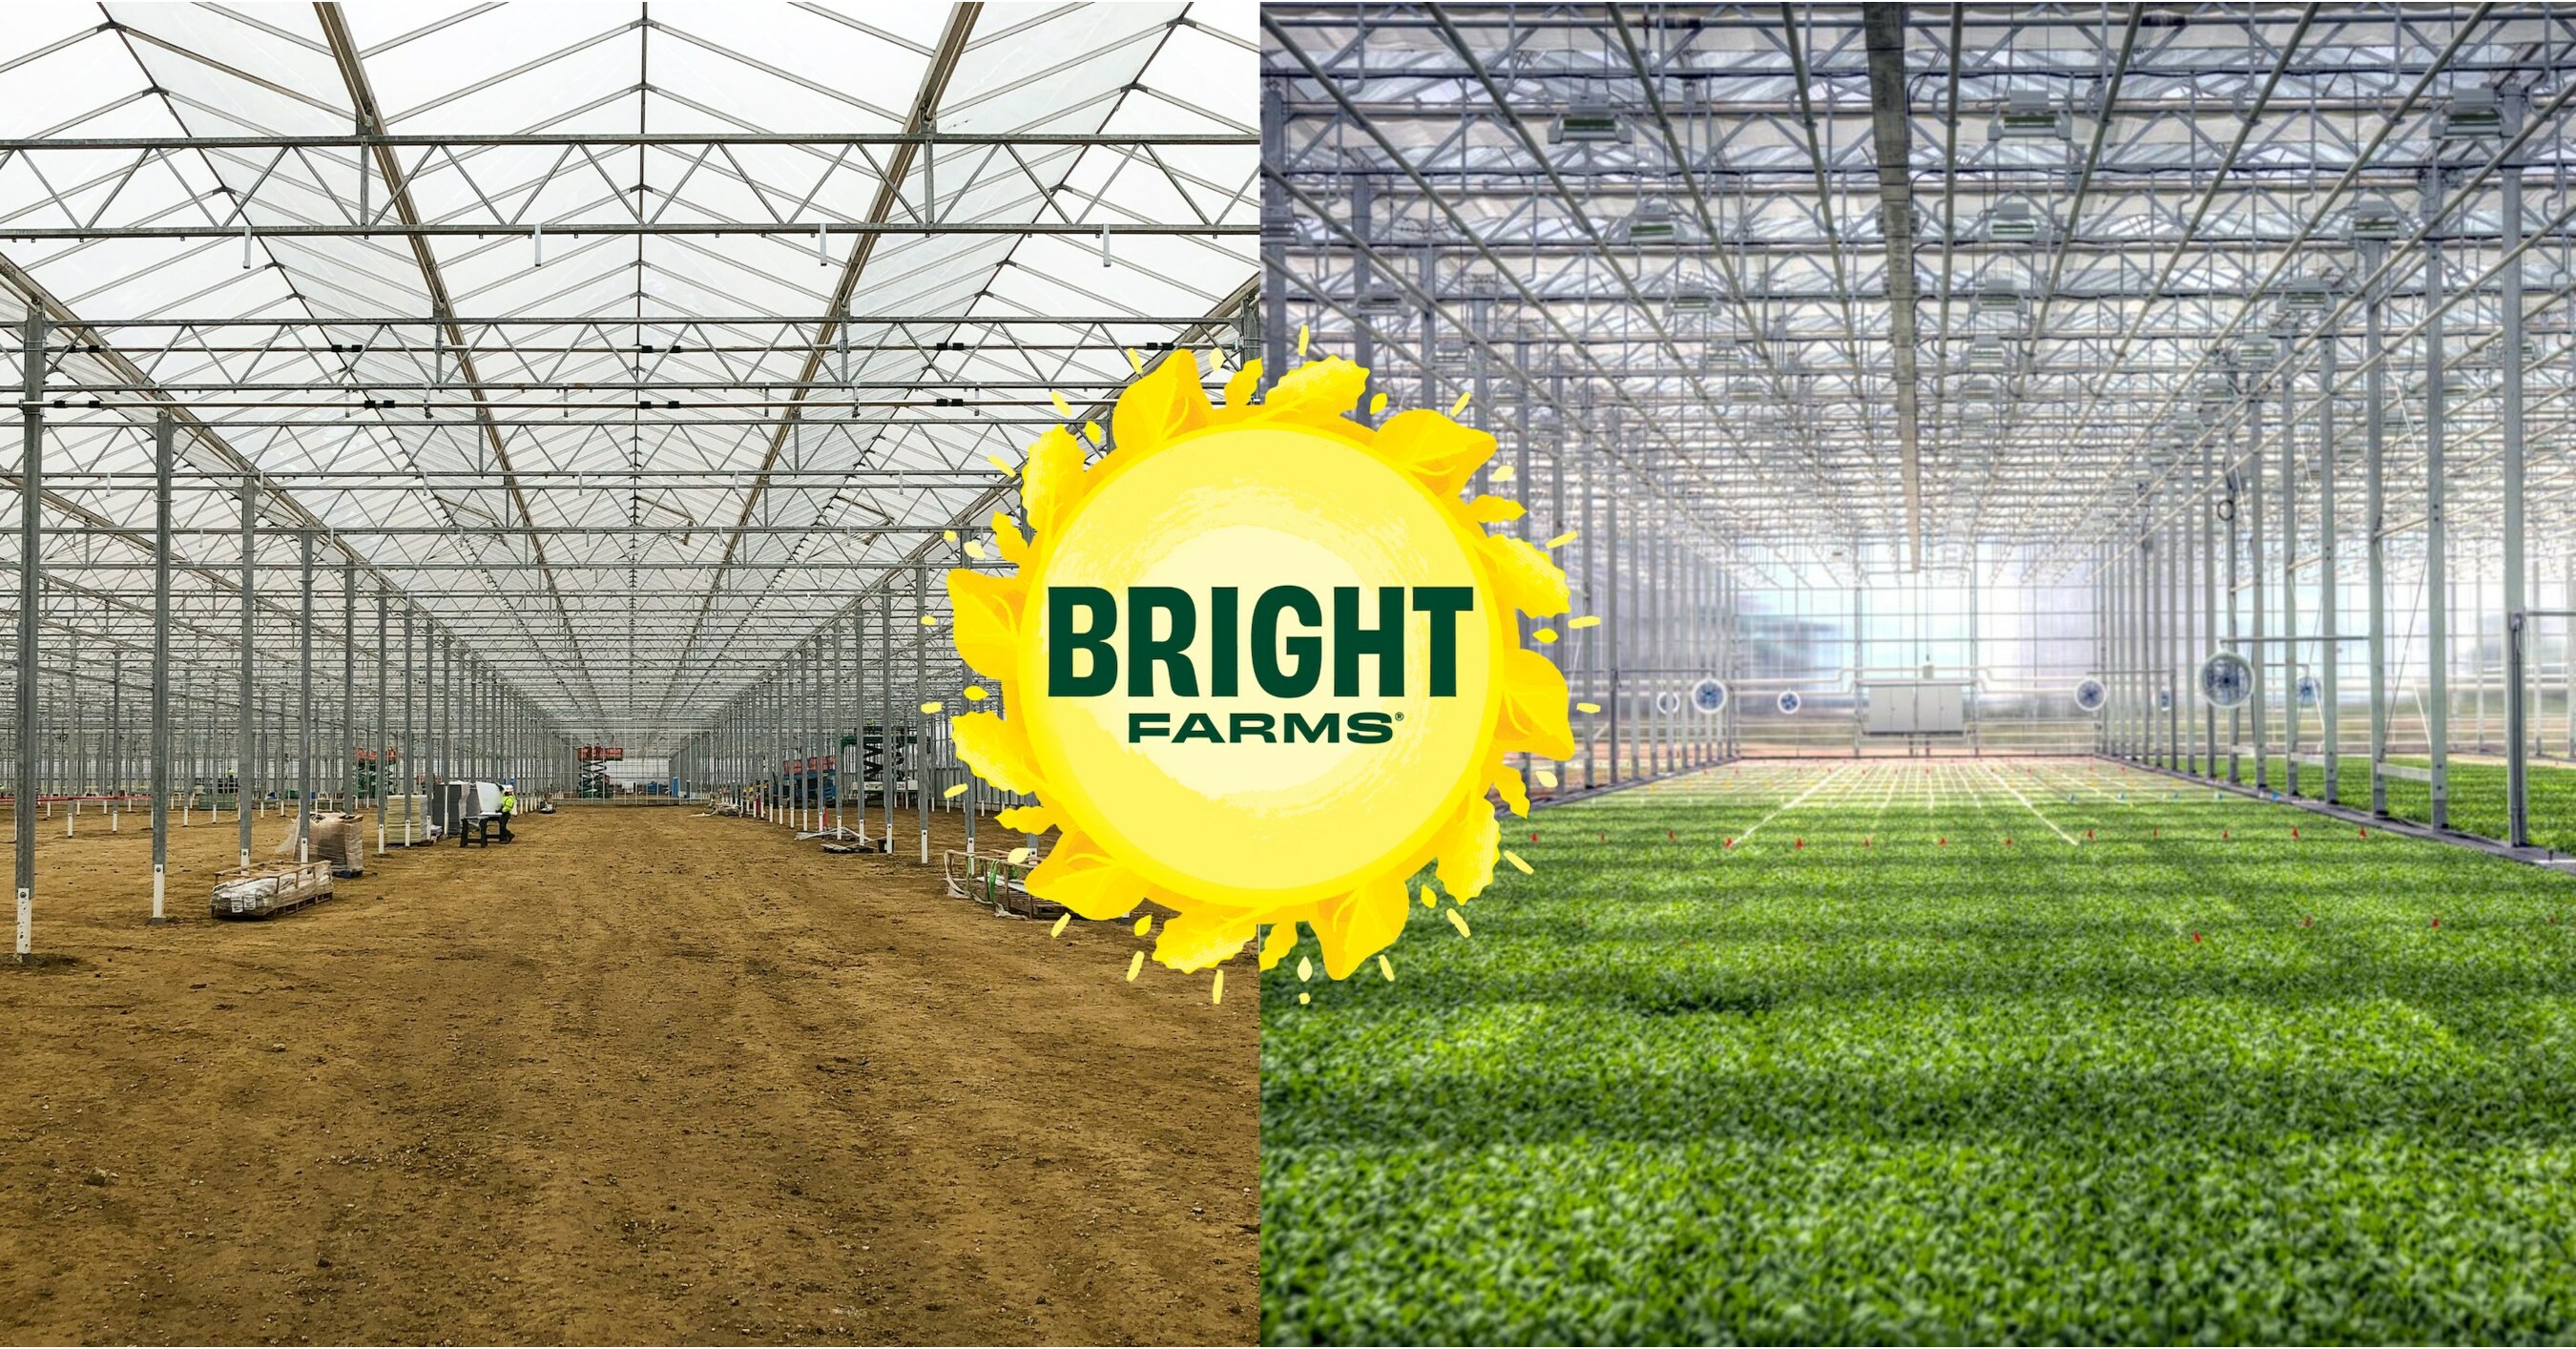 The impact of Bright Branch Farms is felt across the country